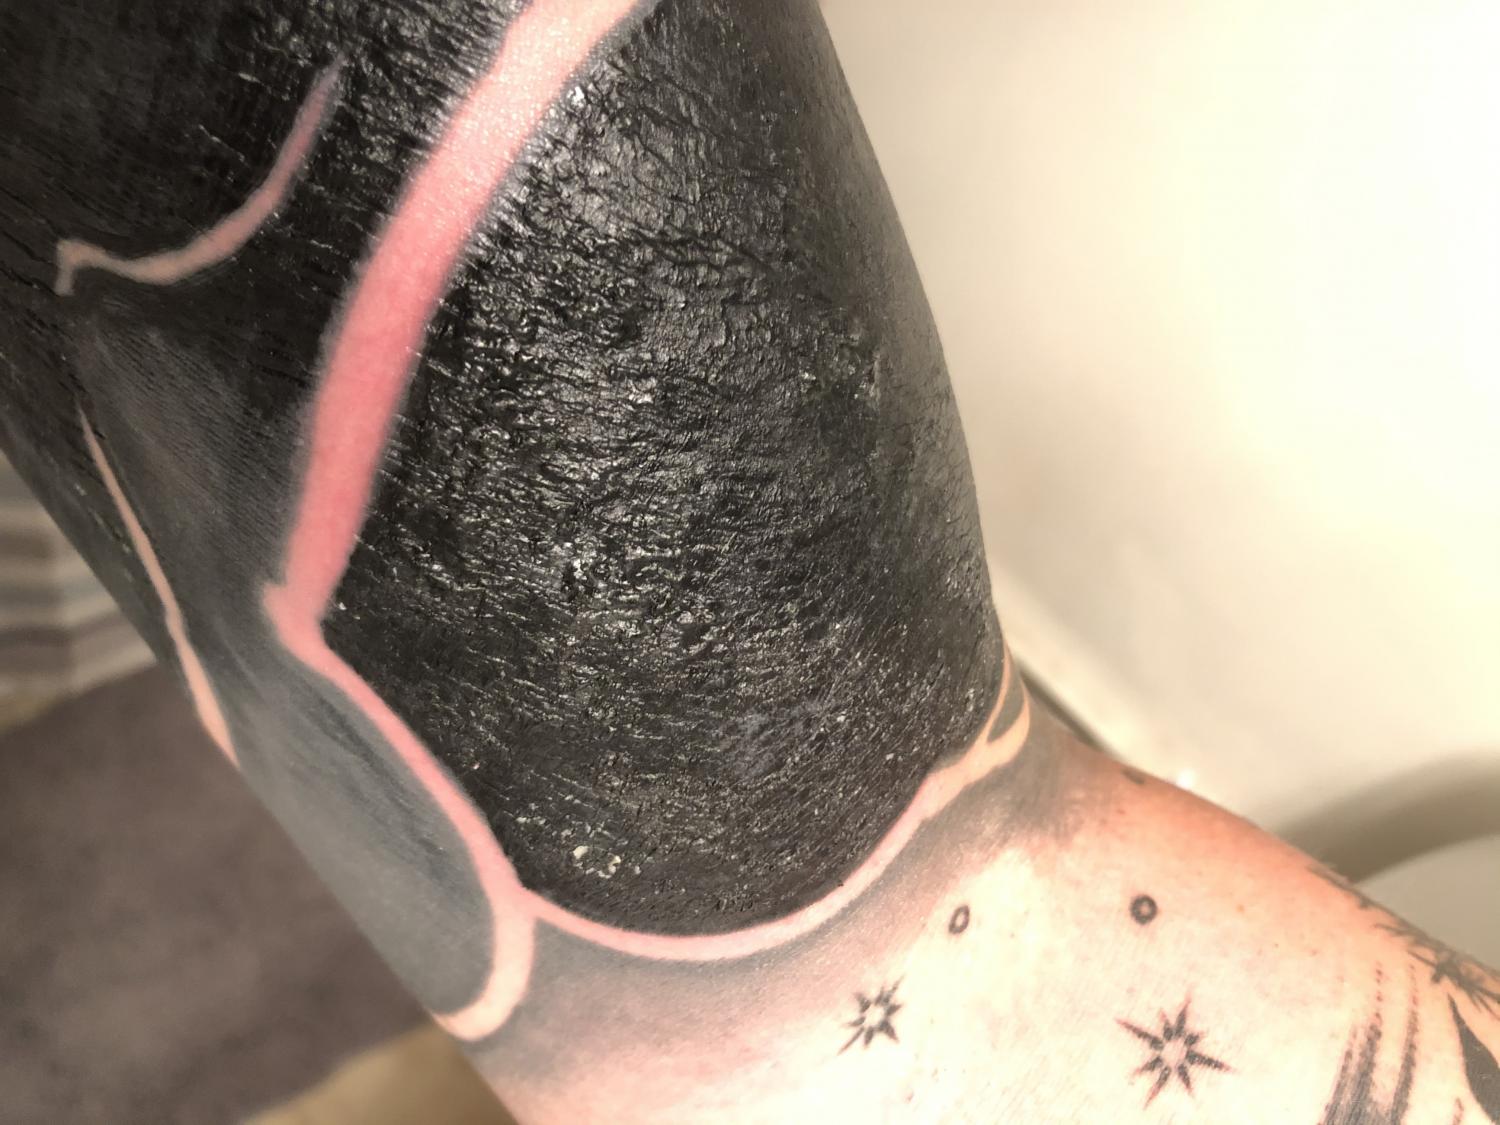 Healed right arm blackout removal : r/TattooRemoval